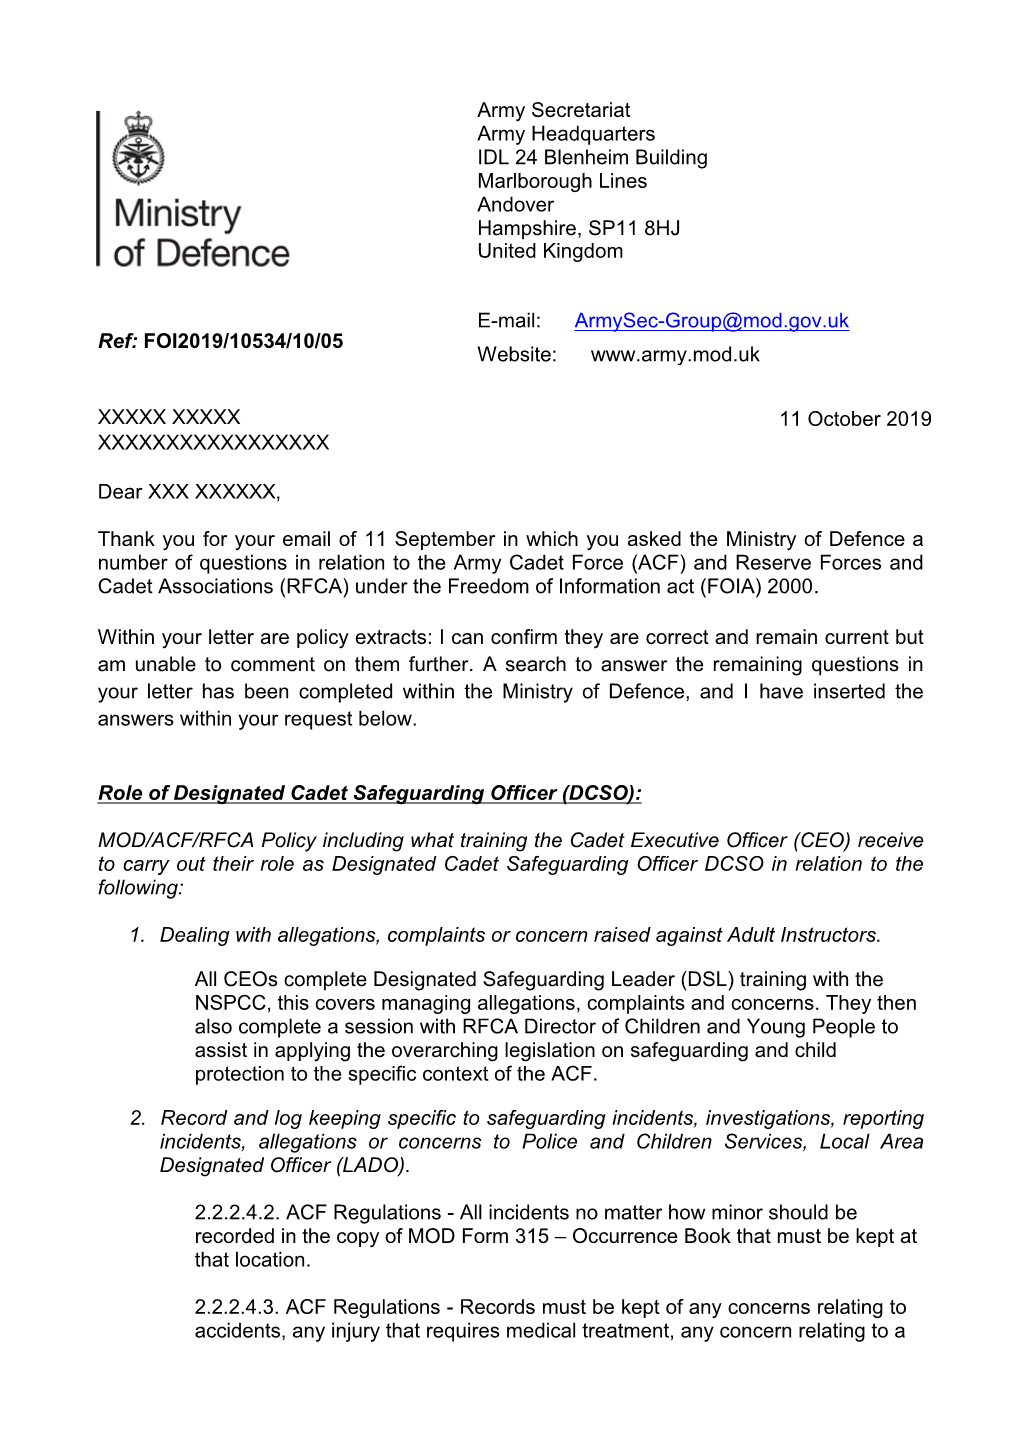 Information Regarding the Army Cadet Force and the Reserve Forces